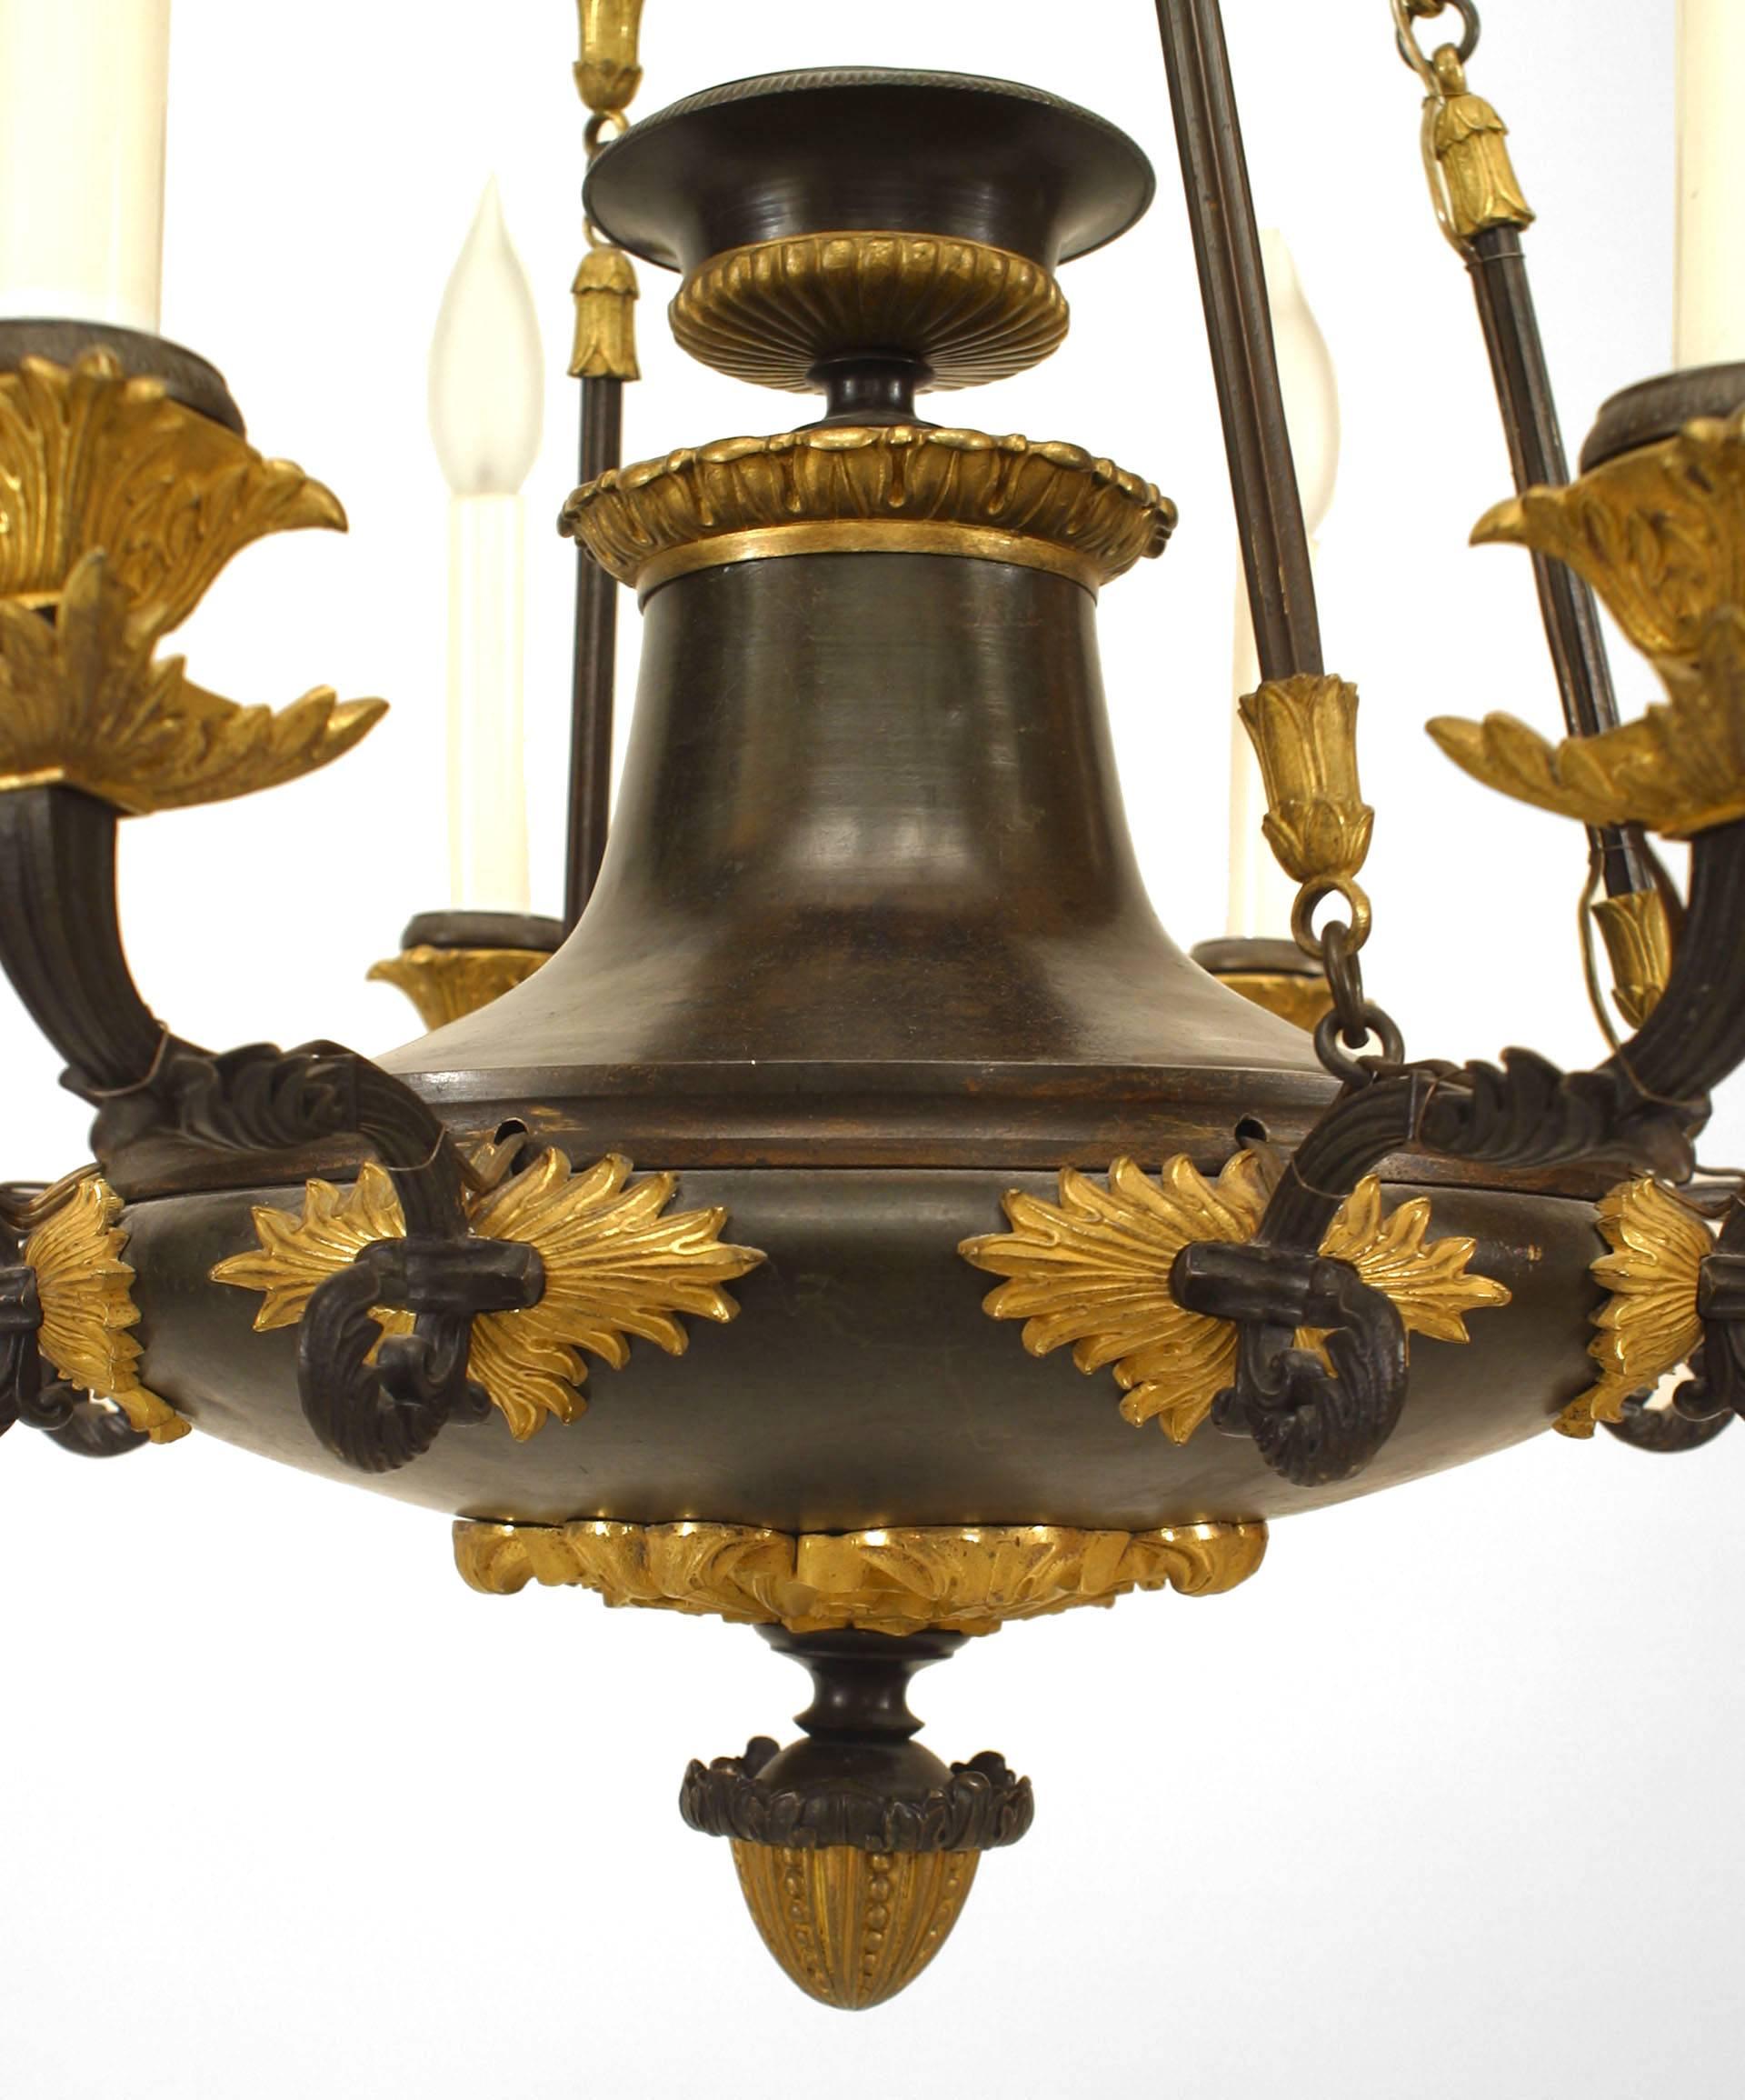 French Empire (circa 1820) bronze & gilt trimmed chandelier with 8 scroll arms emanating from a circular corona with an acorn drop finial and suspended by 4 foliate chains.
